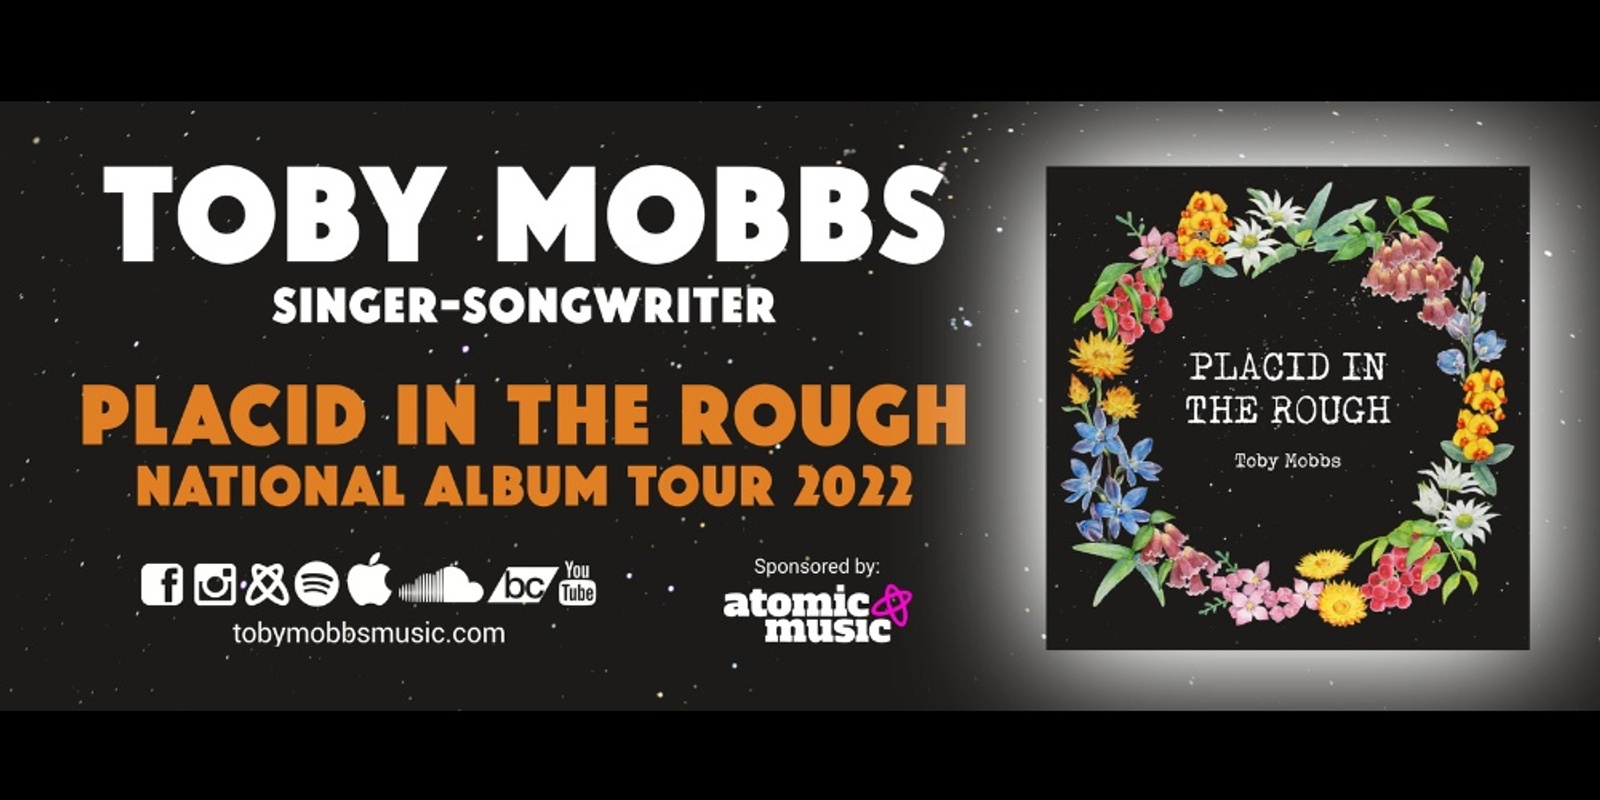 Banner image for Toby Mobbs Placid in the Rough National Album Tour